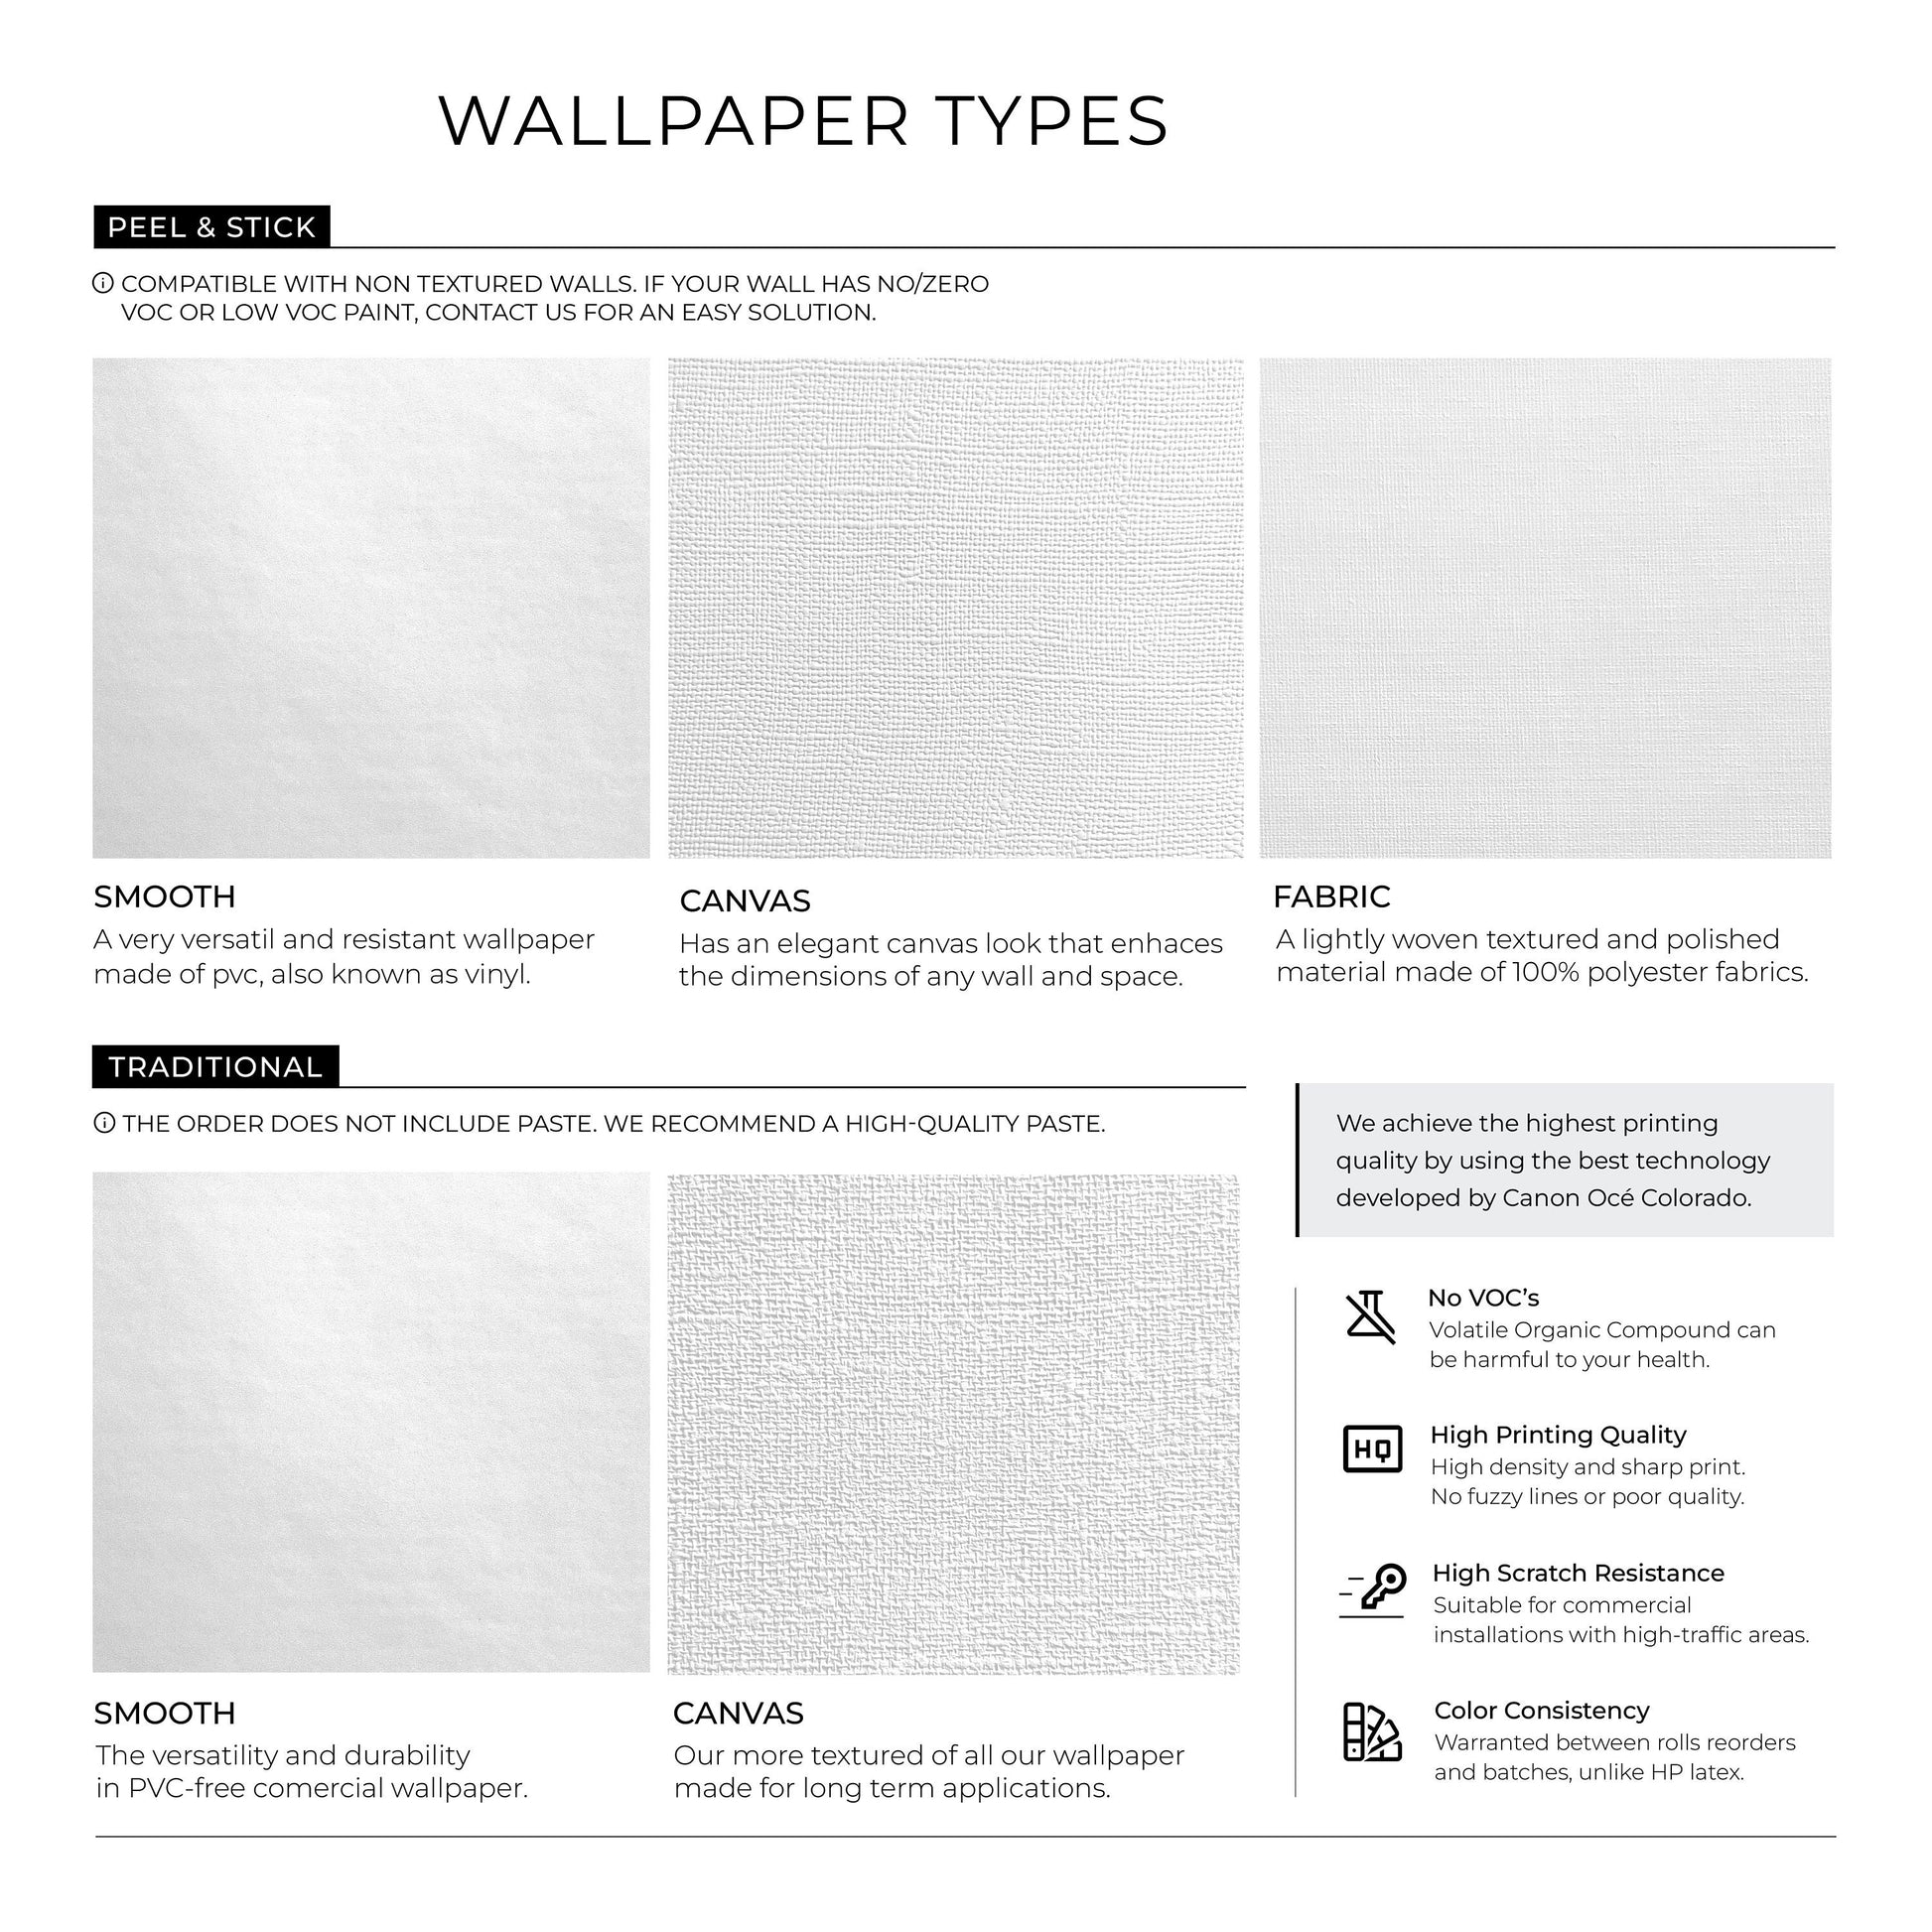 Removable Wallpaper Peel and Stick Wallpaper Wall Paper Wall - Monochromatic Leaves Wallpaper - C264